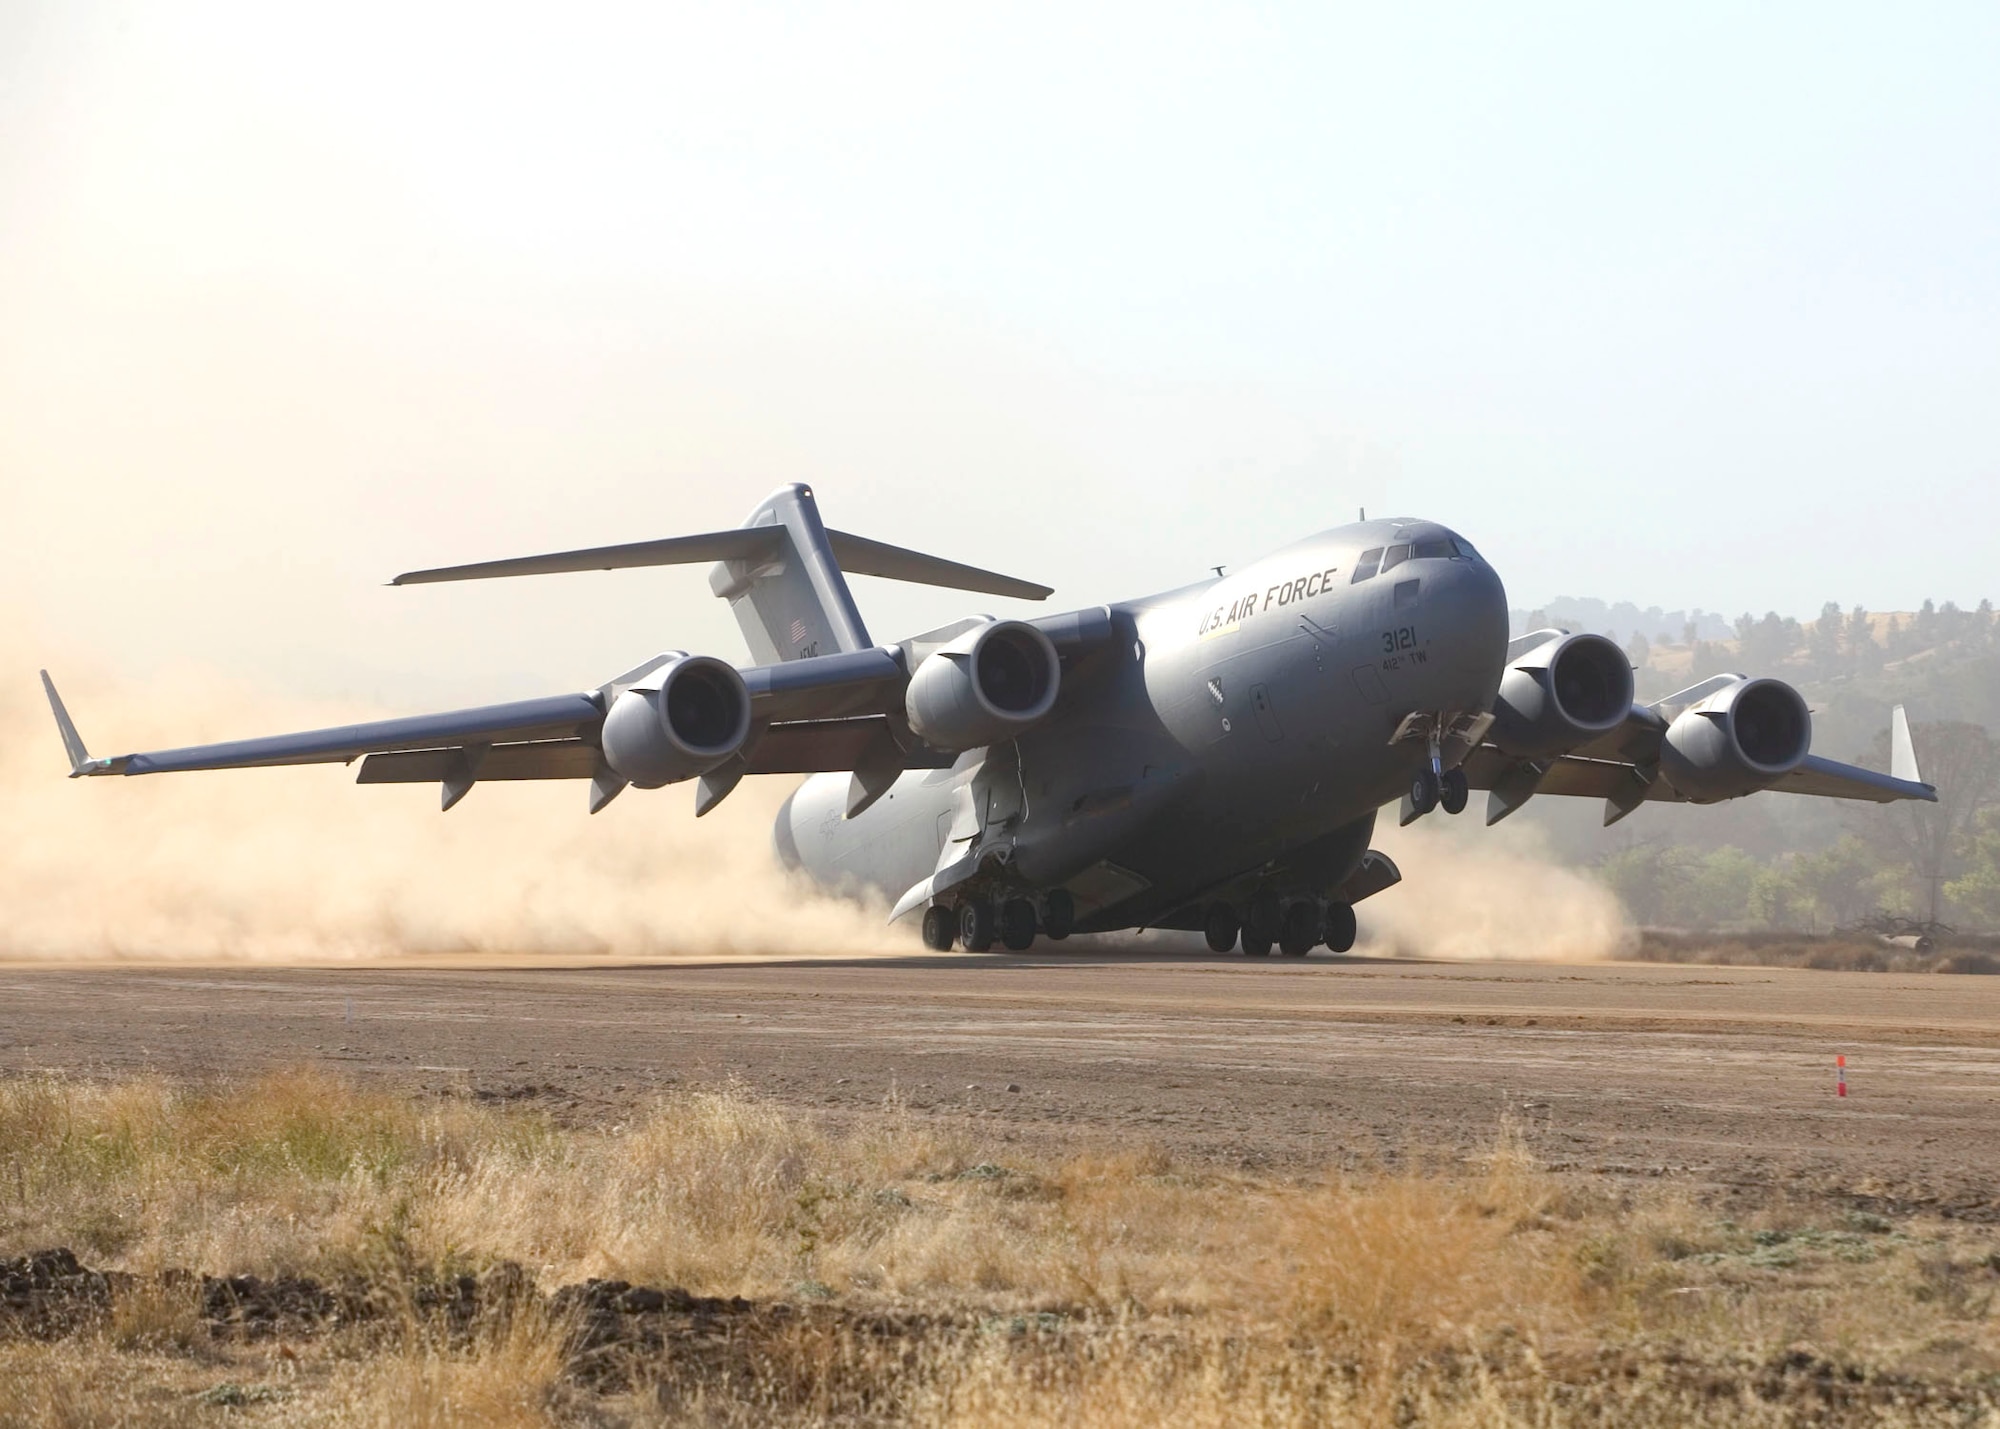 A C-17 Globemaster III takes off during Phase 1 tests at Fort Hunter Liggett, Calif. Tests are being conducted to determine the C-17's ability to bring a large force into a wet or dry dirt airfield without making runway condition corrections. Phase 2 is scheduled to begin Dec. 4 at Edwards Air Force Base, Calif. (U.S. Air Force photo/Bobbi Zapka) 